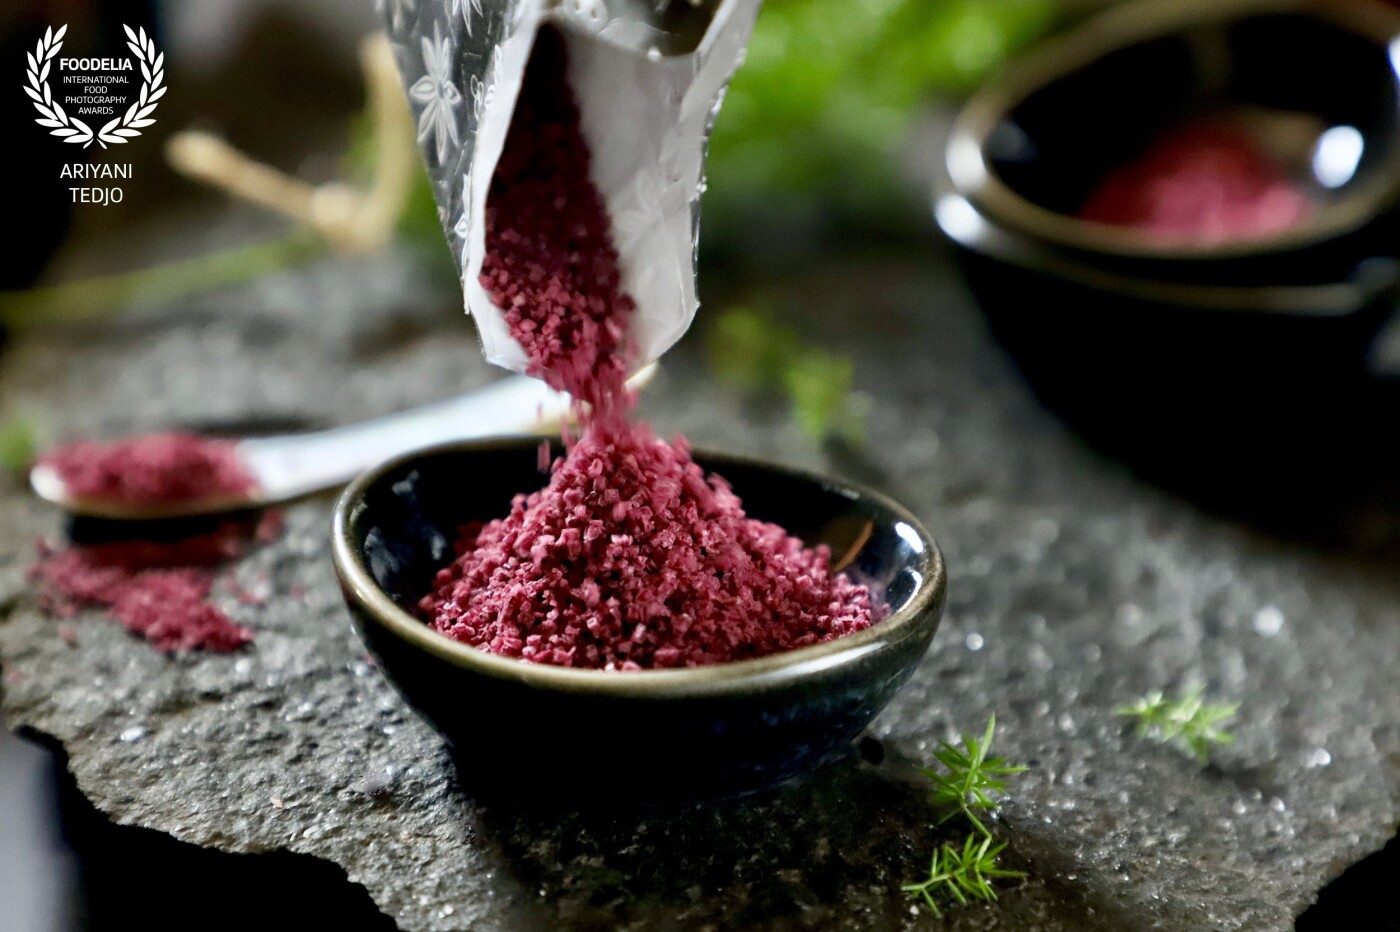 A rare kind of gourmet seasoning, Vintage Merlot Salt. I was mesmerized by it's bold and brilliant so decided to give it a try for my cooking. Before I did, I took the time to play with and capture it.